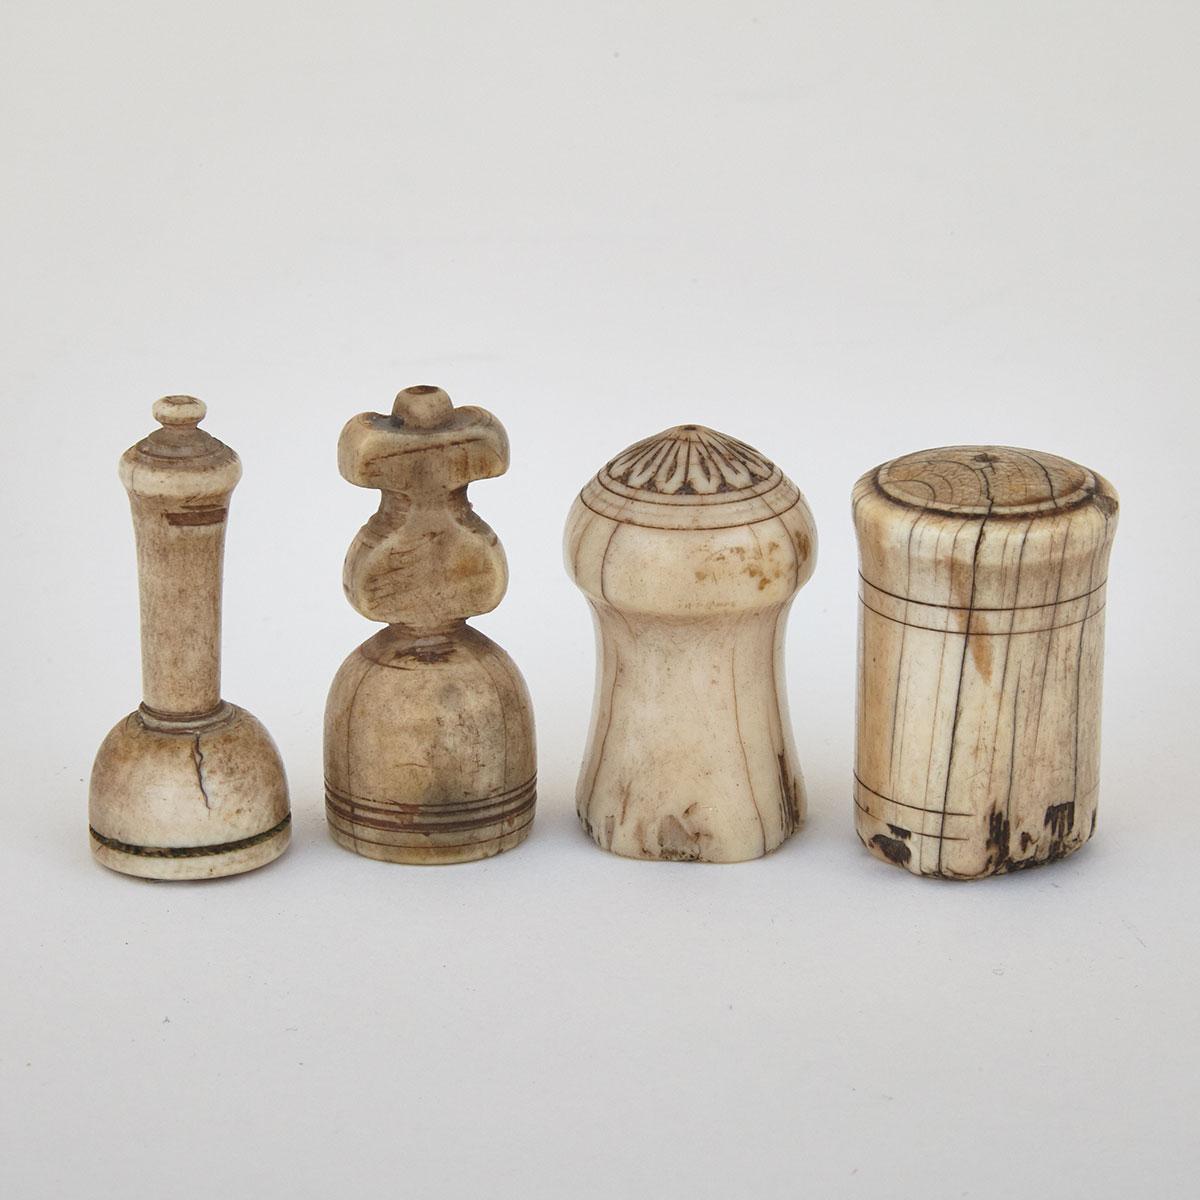 Four Arabic Islamic or ‘Muslim’ Bone and Ivory Chess Pieces, 11th century